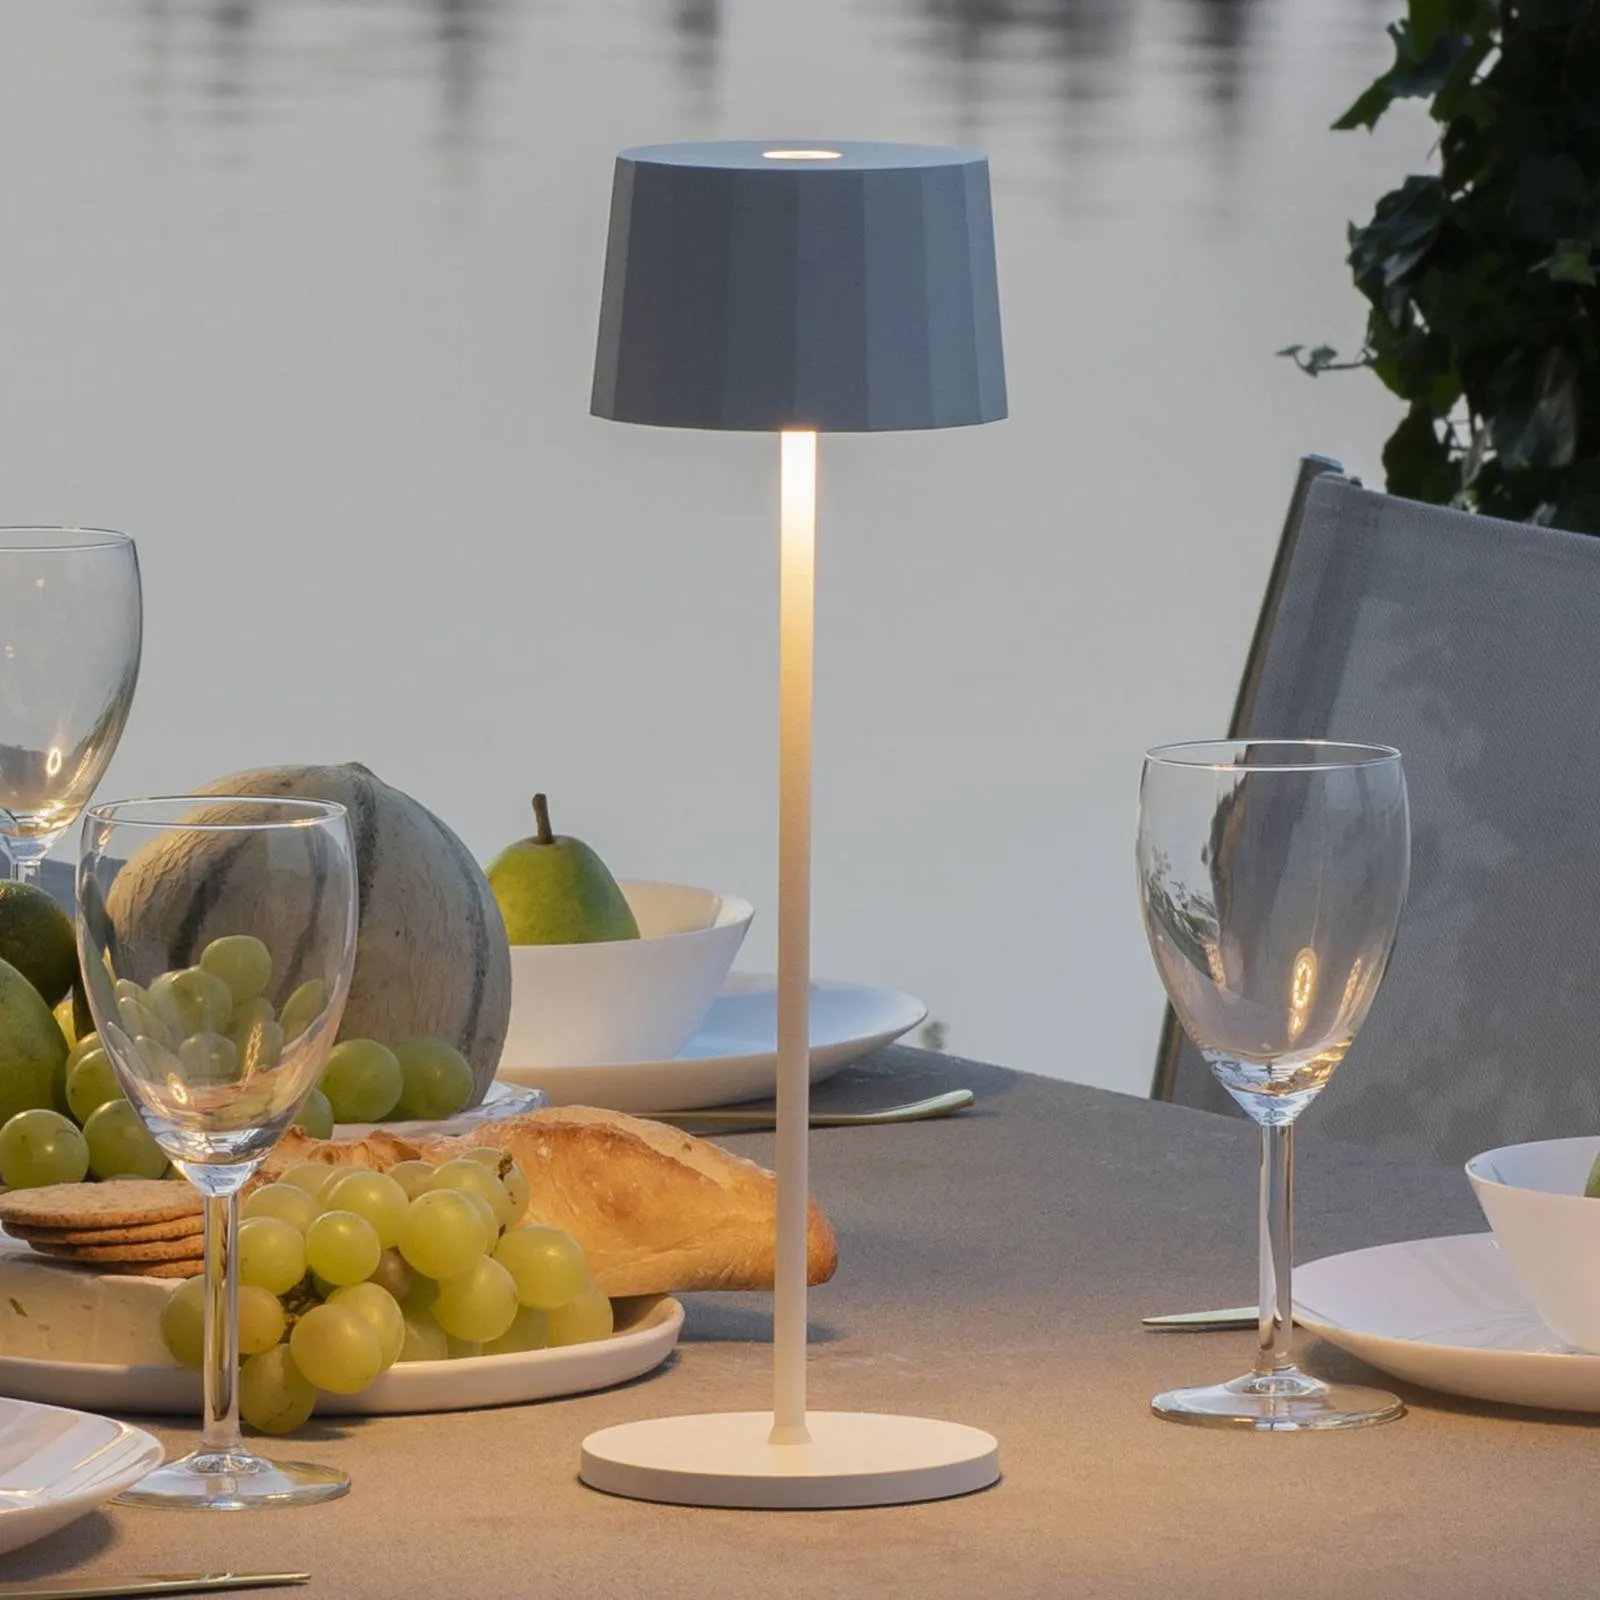 Positano LED table lamp for outdoors, white